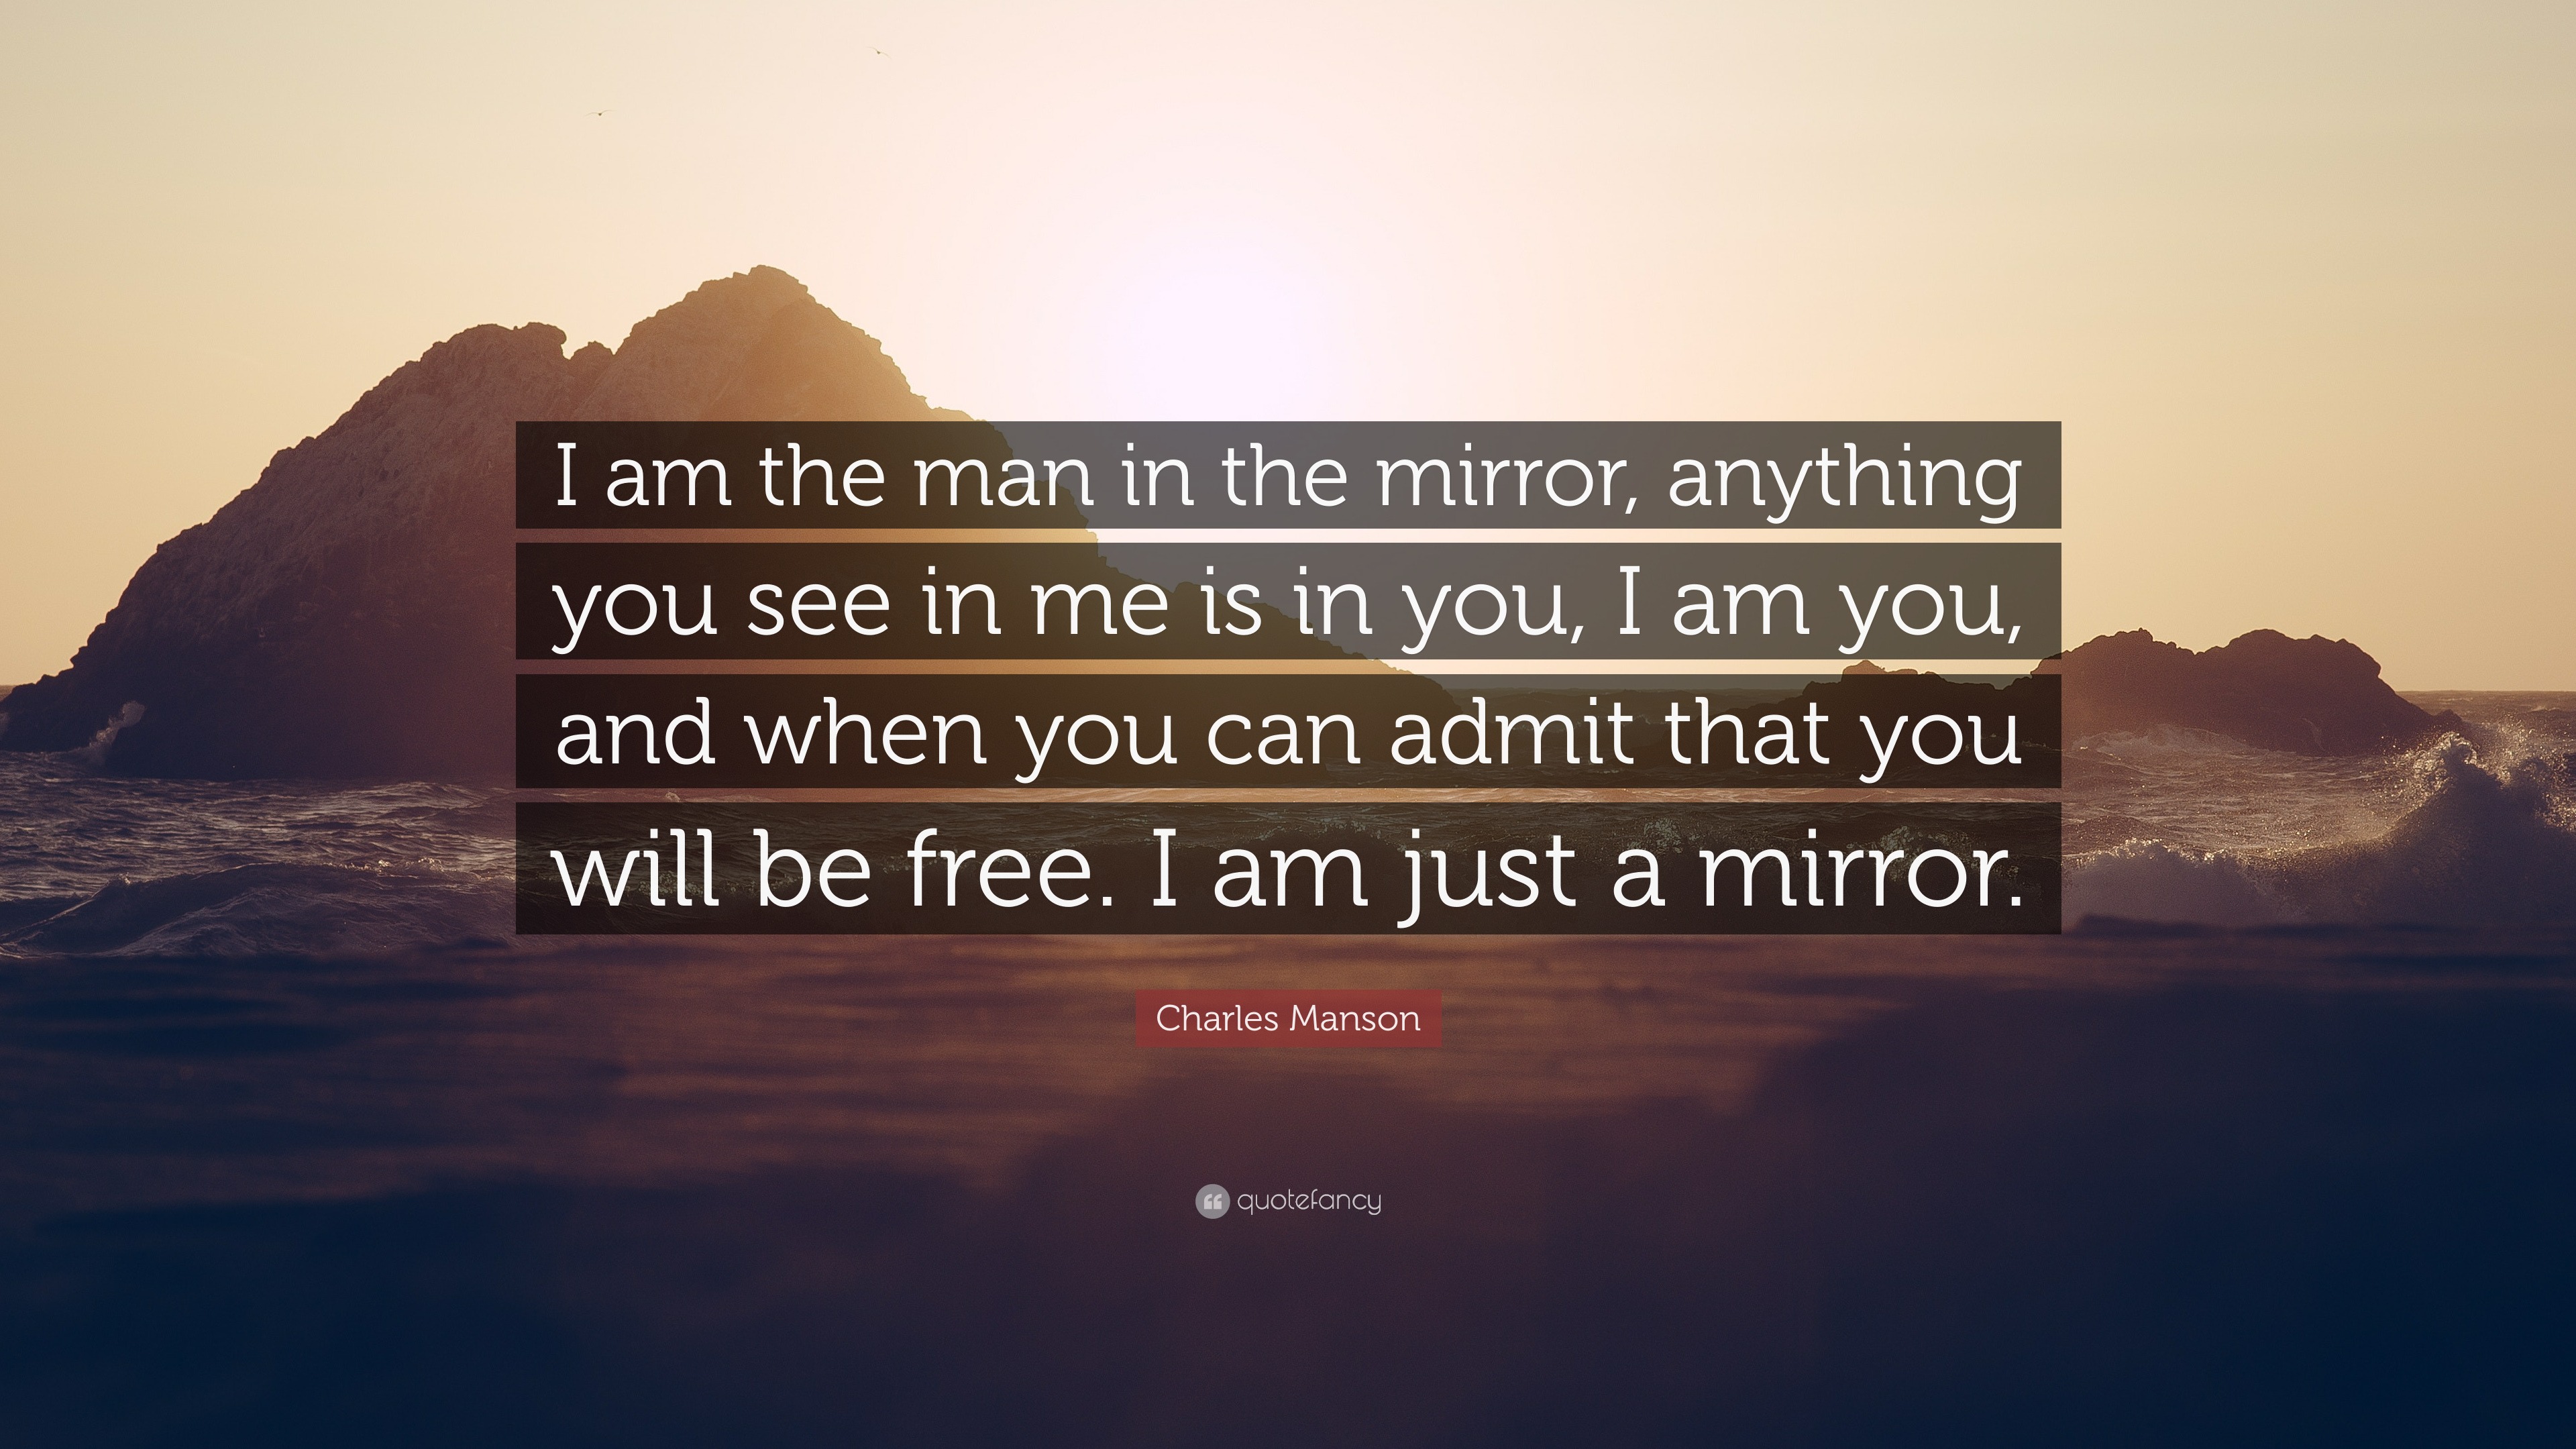 Charles Manson Quote: "I am the man in the mirror, anything you see in...